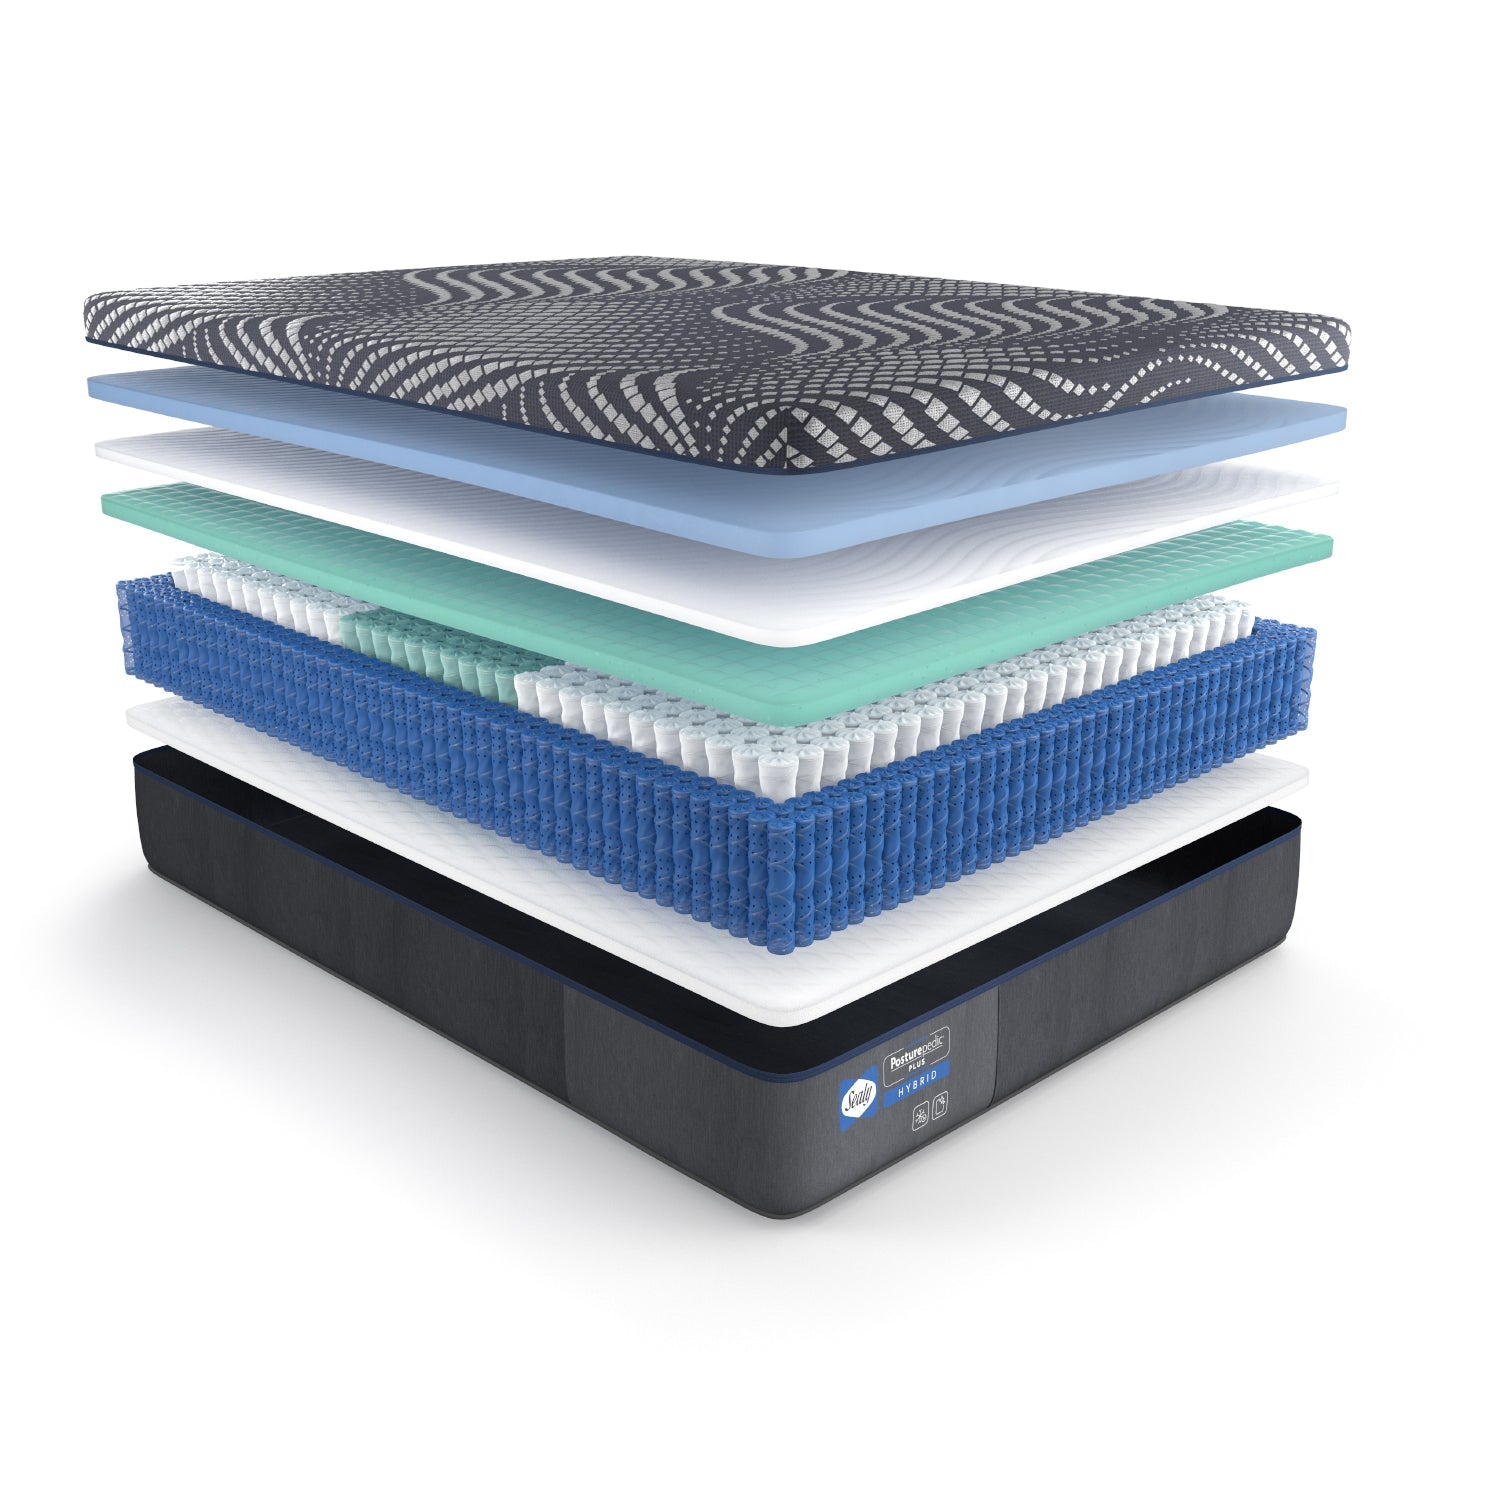 Posturepedic® Plus Hybrid High Point Firm Mattress by Sealy